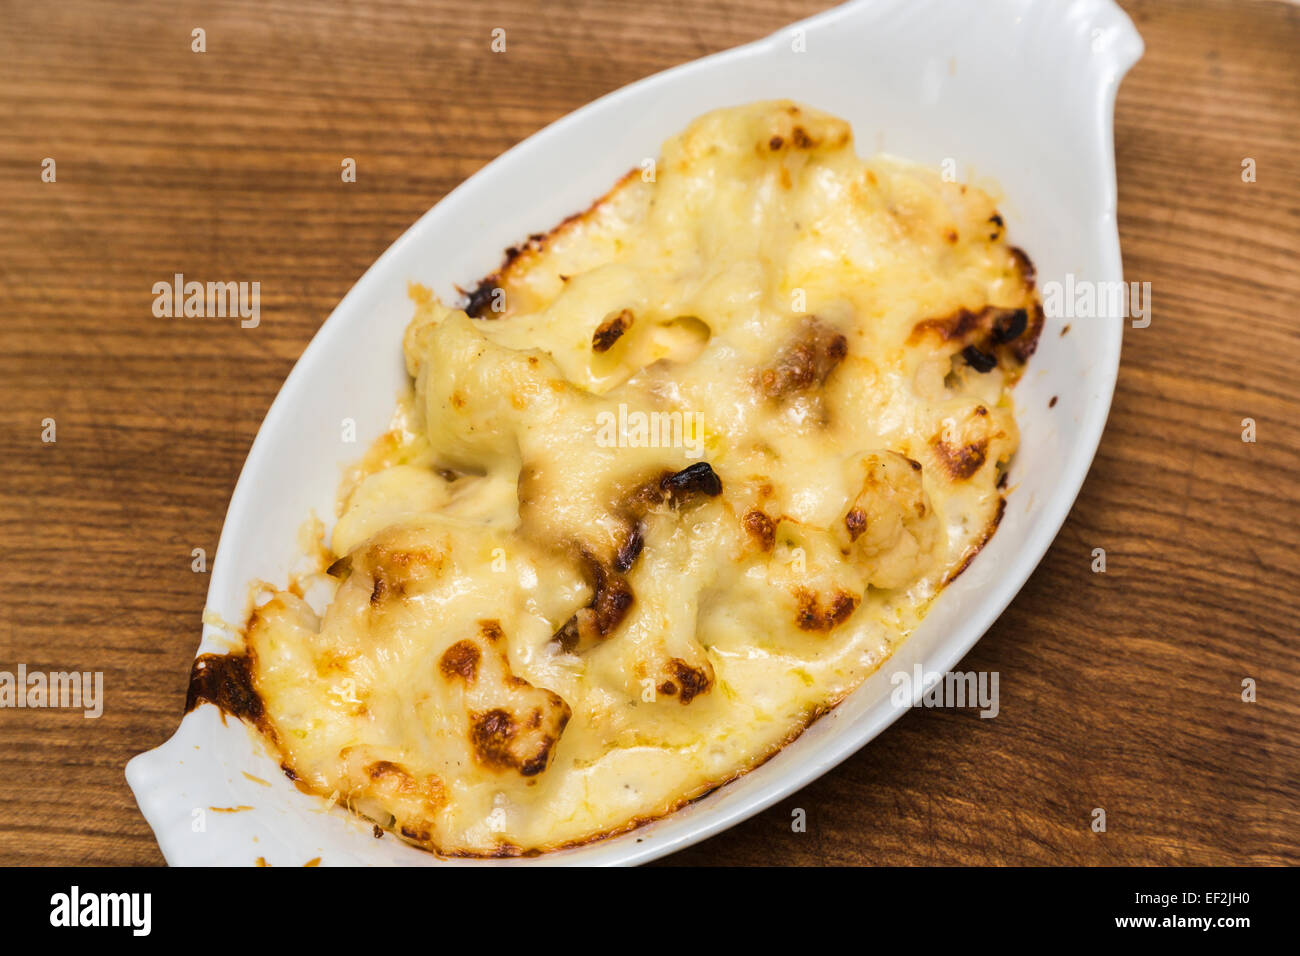 Plate of delicious home made baked cauliflower cheese served in an oval plain white china dish on a wooden board Stock Photo